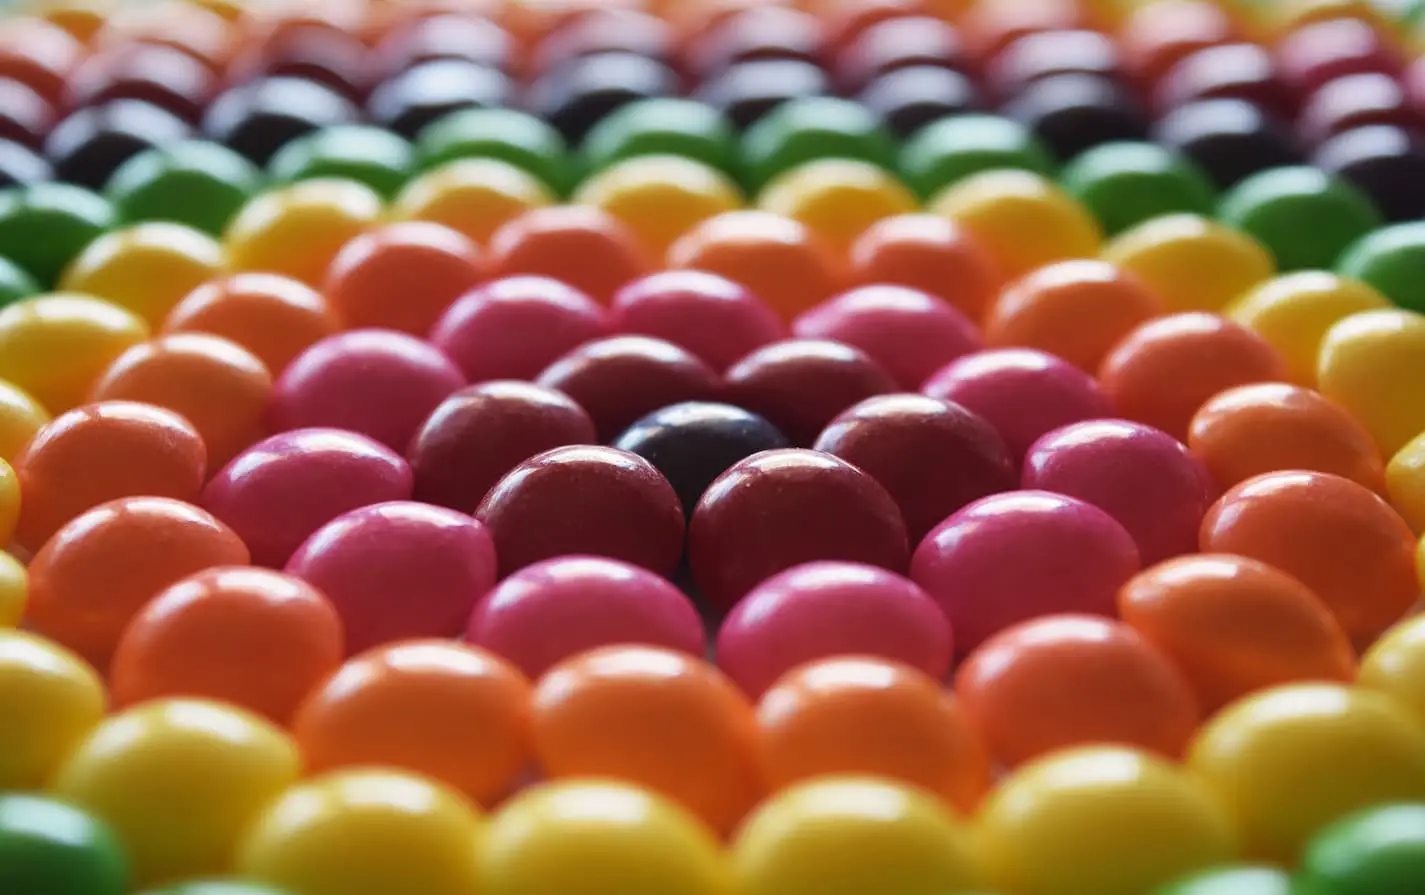 An image of skittles arranged in a rainbow.